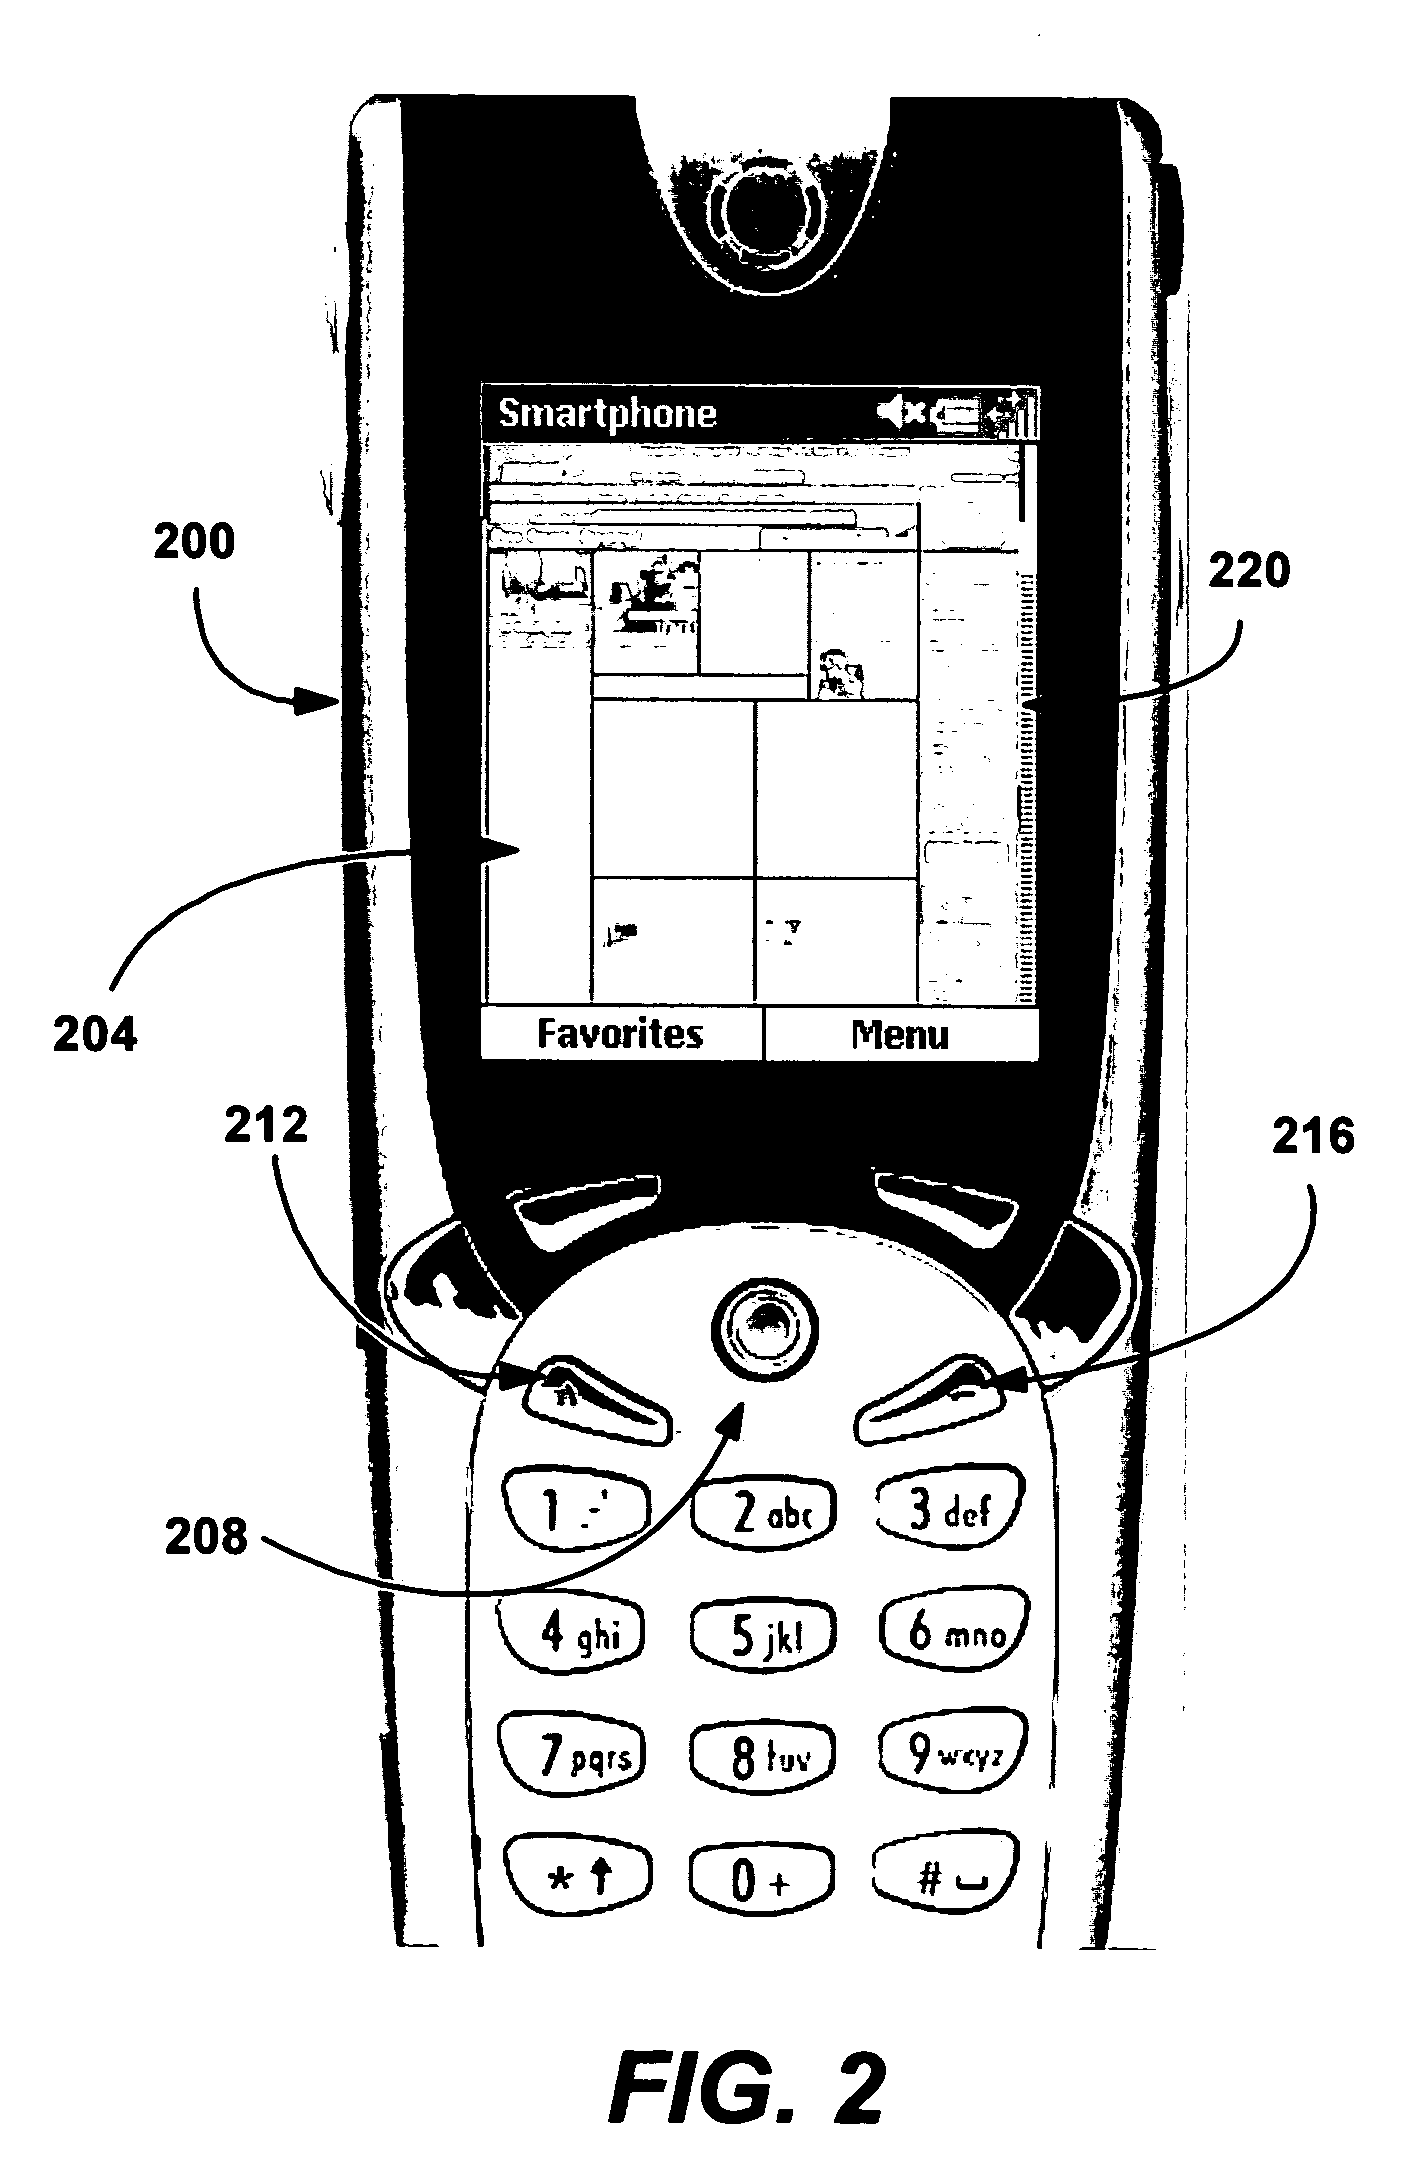 Method and system for improved viewing and navigation of content